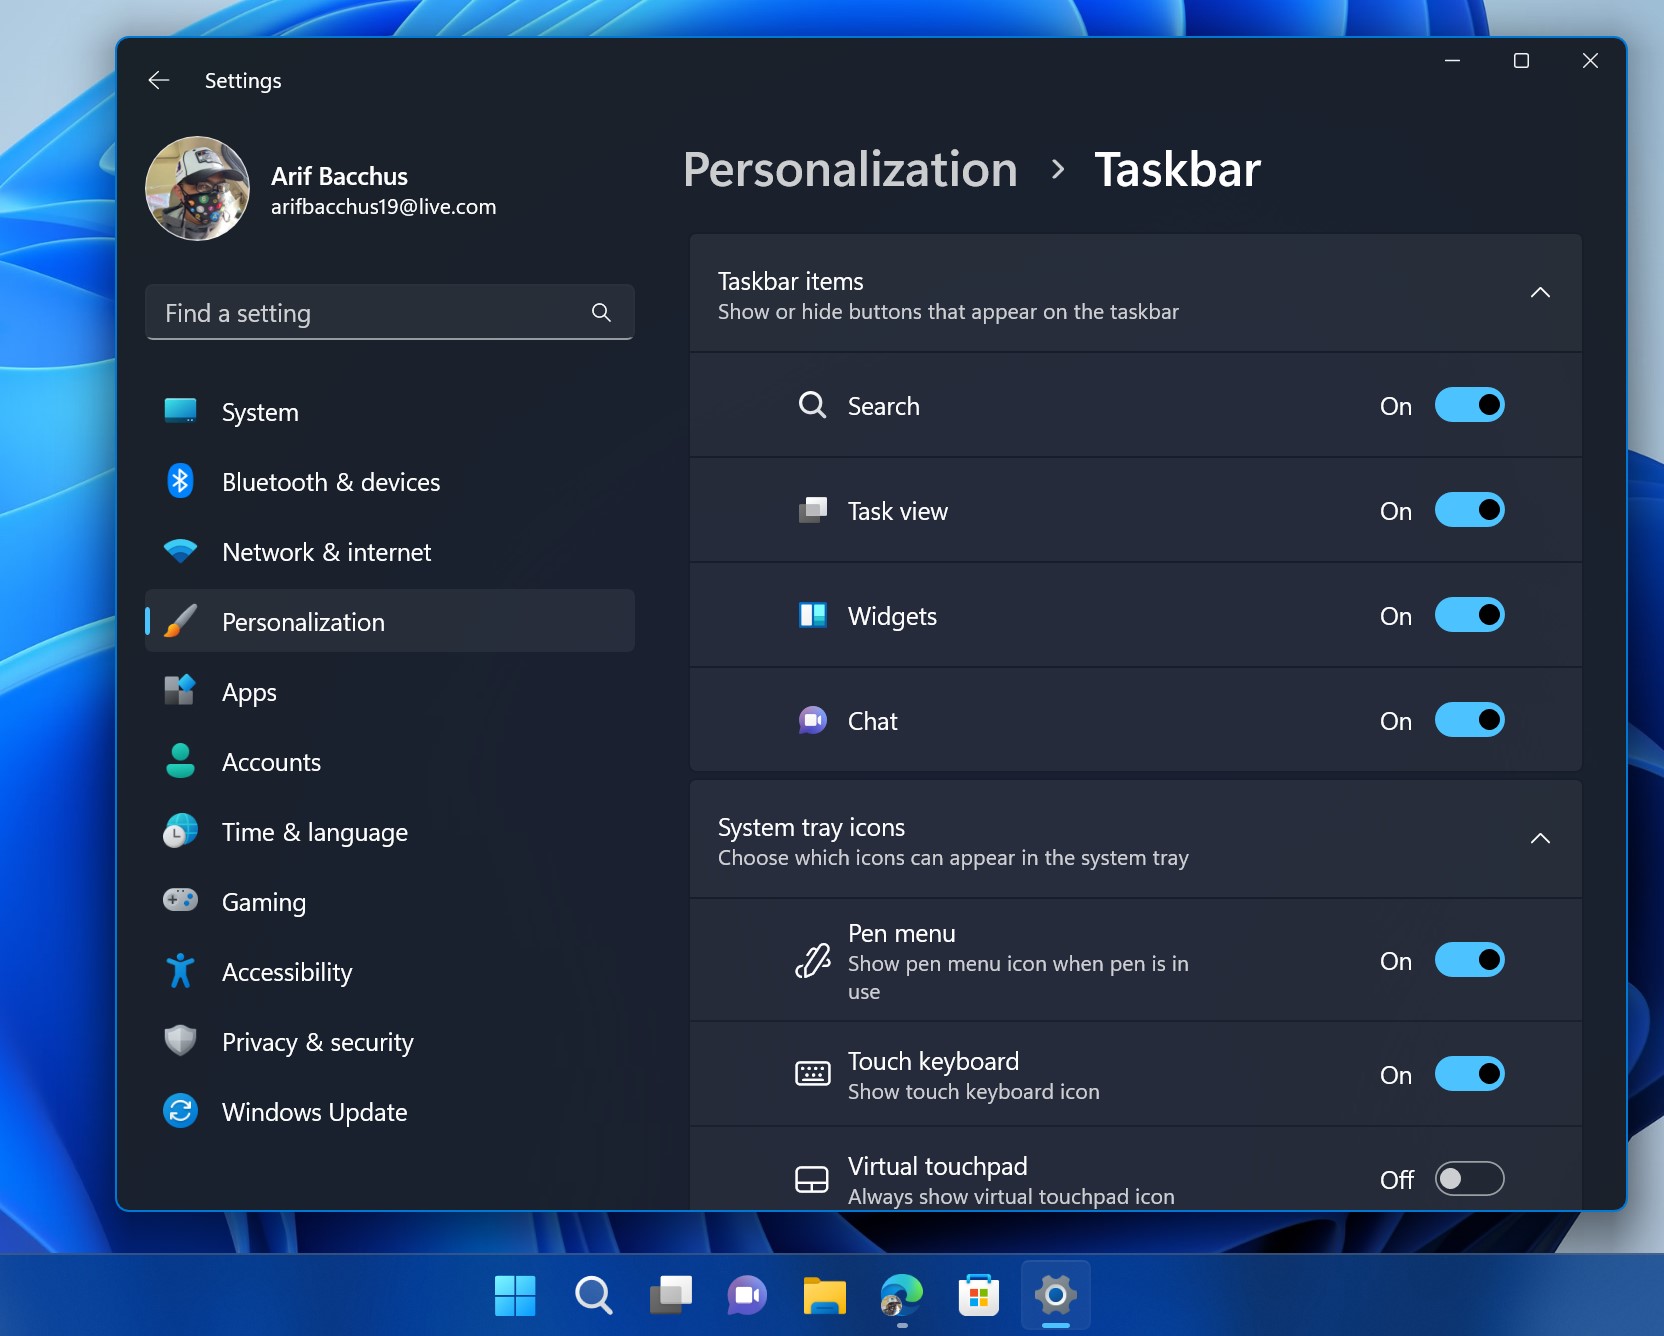 Windows 11 vs Windows 10 - Ten Big Differences You Need To Know